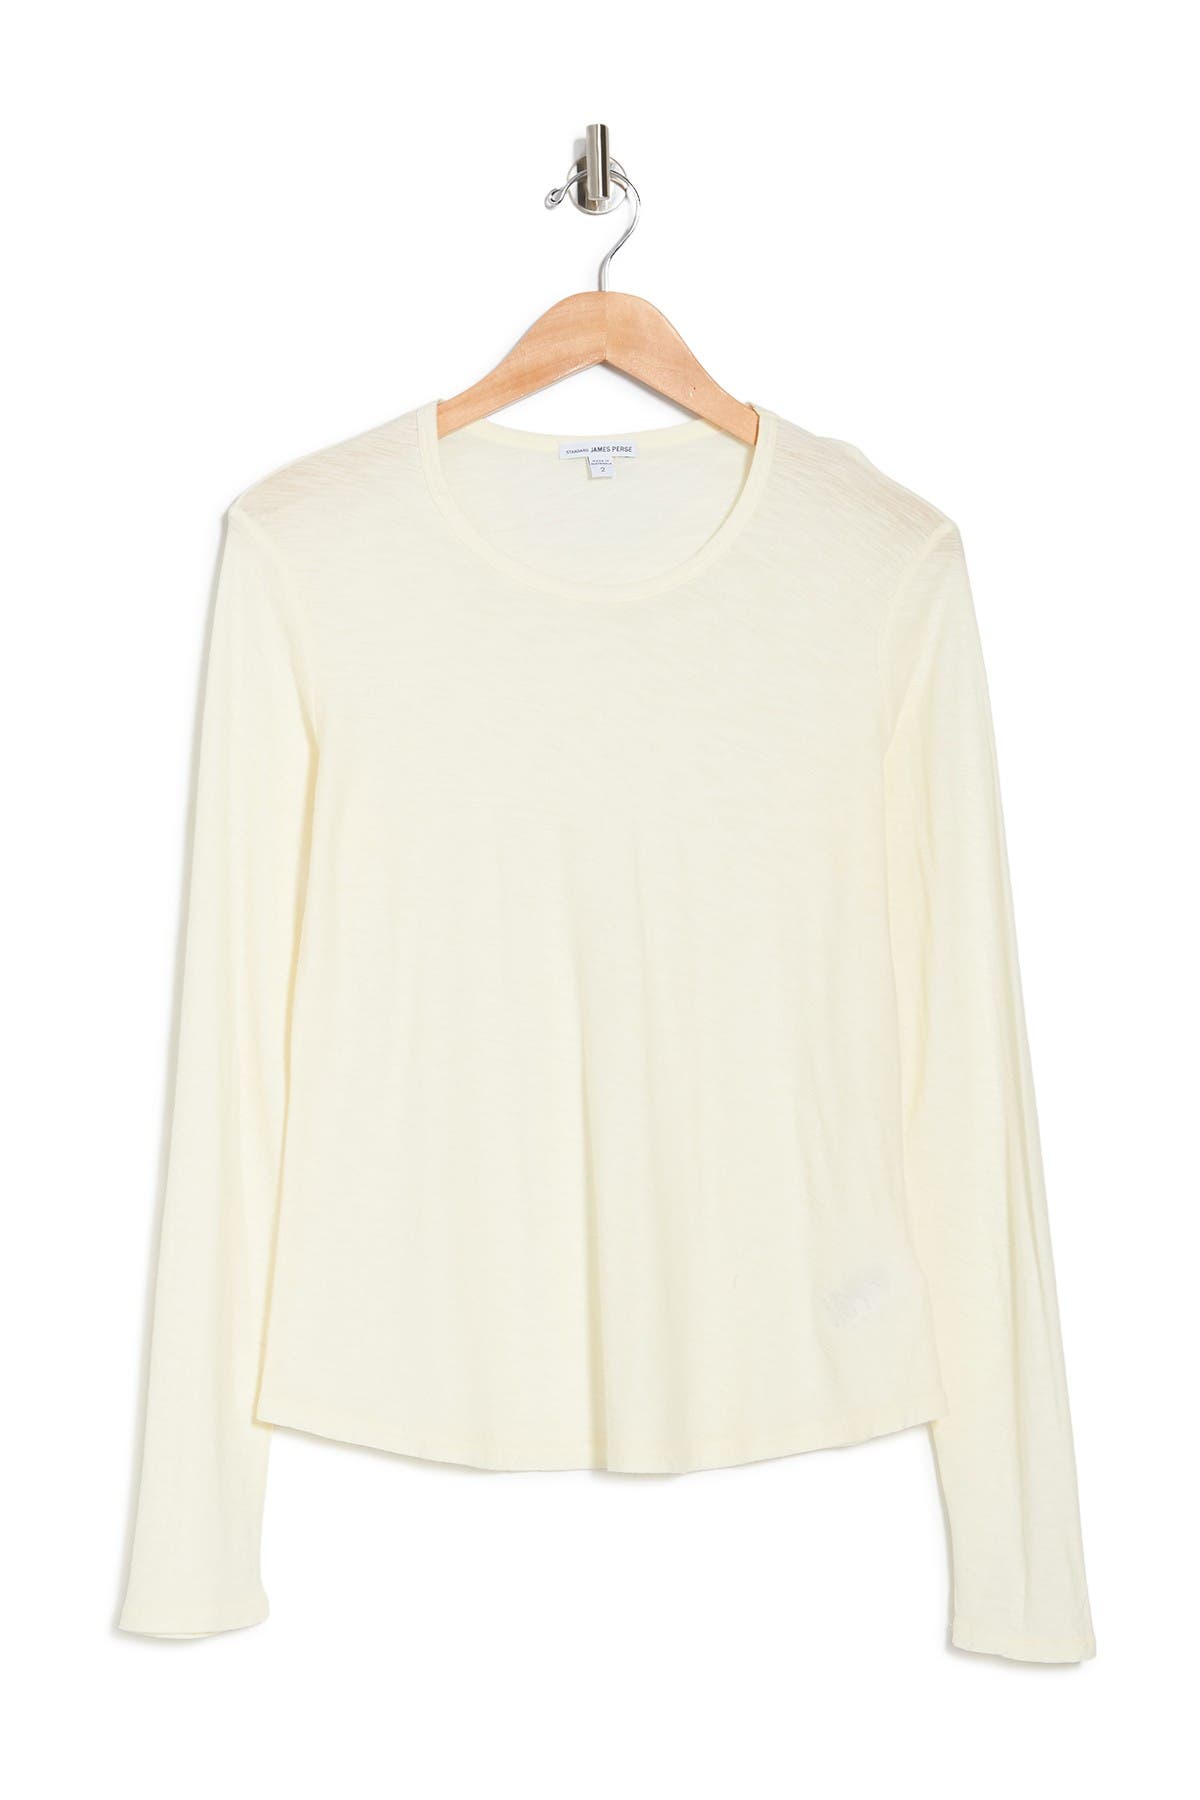 James Perse Long Sleeve Crew Neck T-shirt In Naples Yel